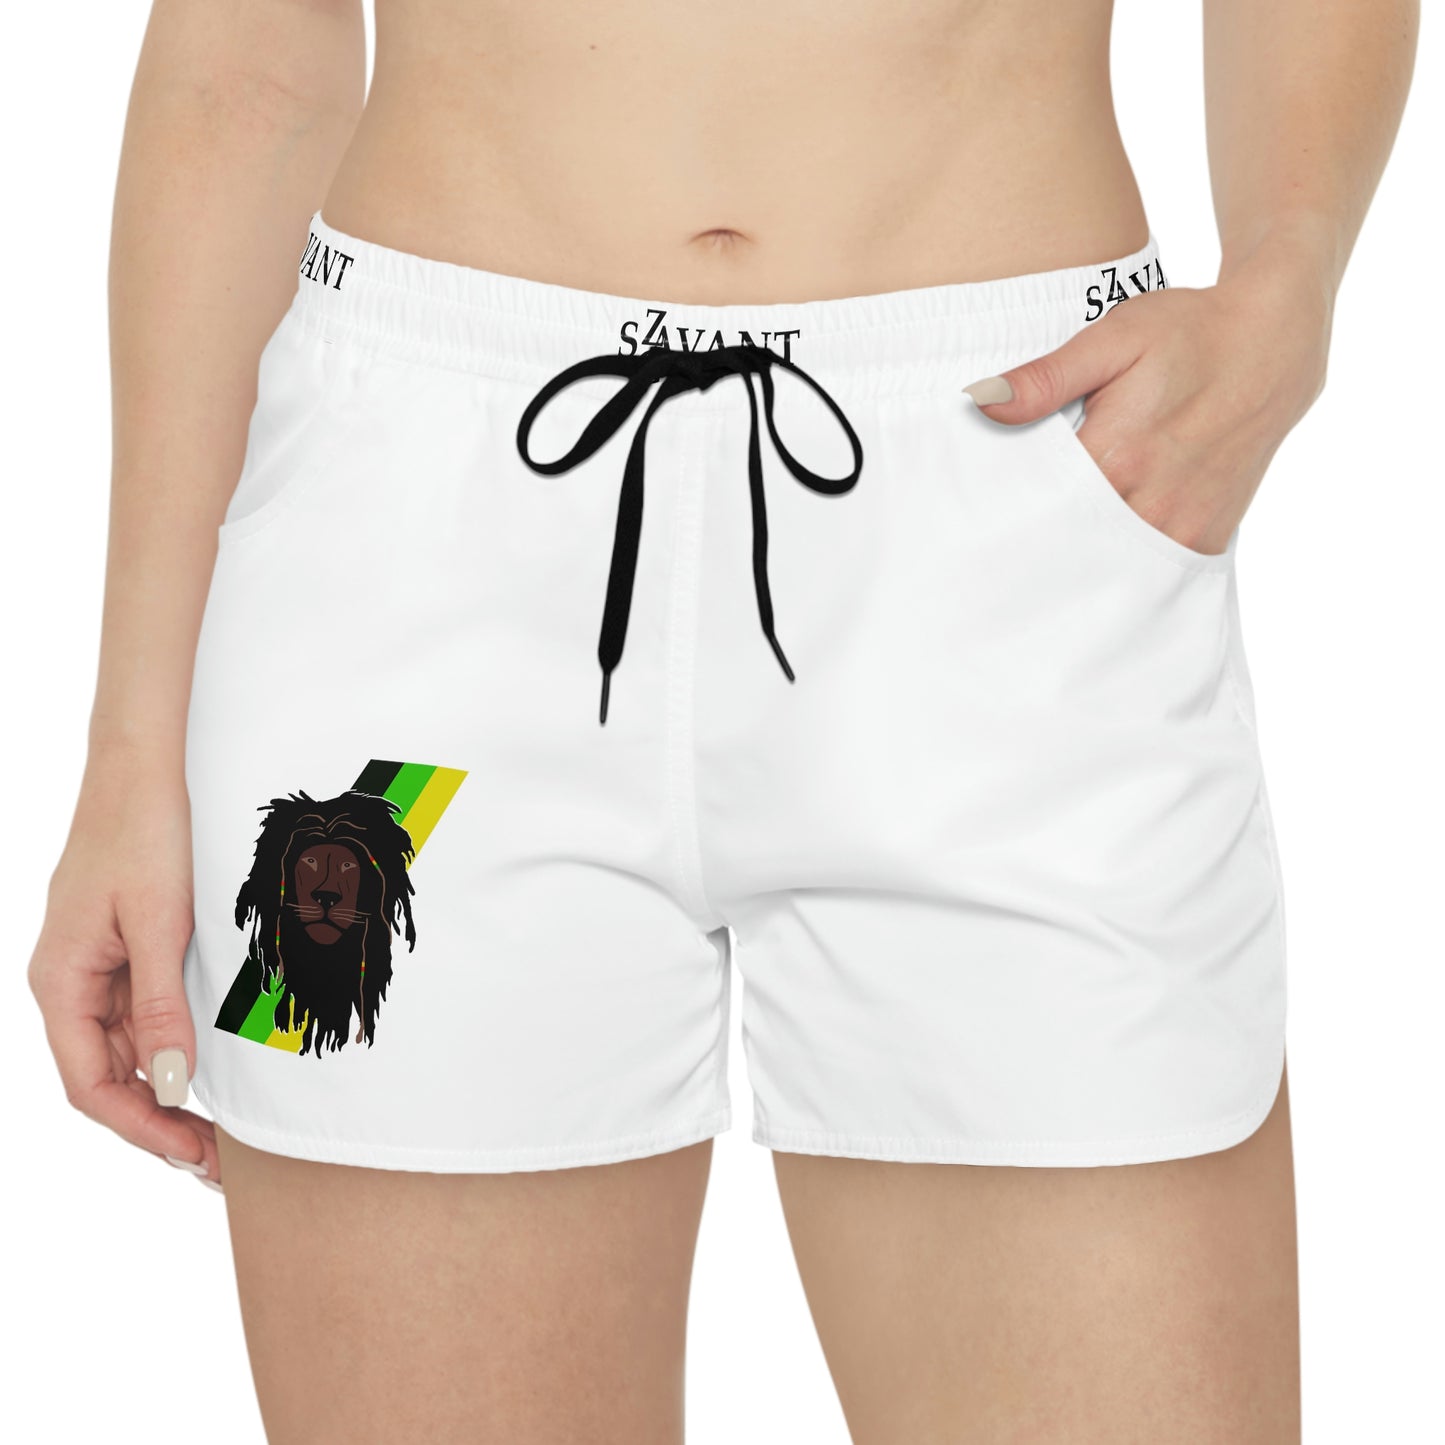 White shorts with Jamaican colors